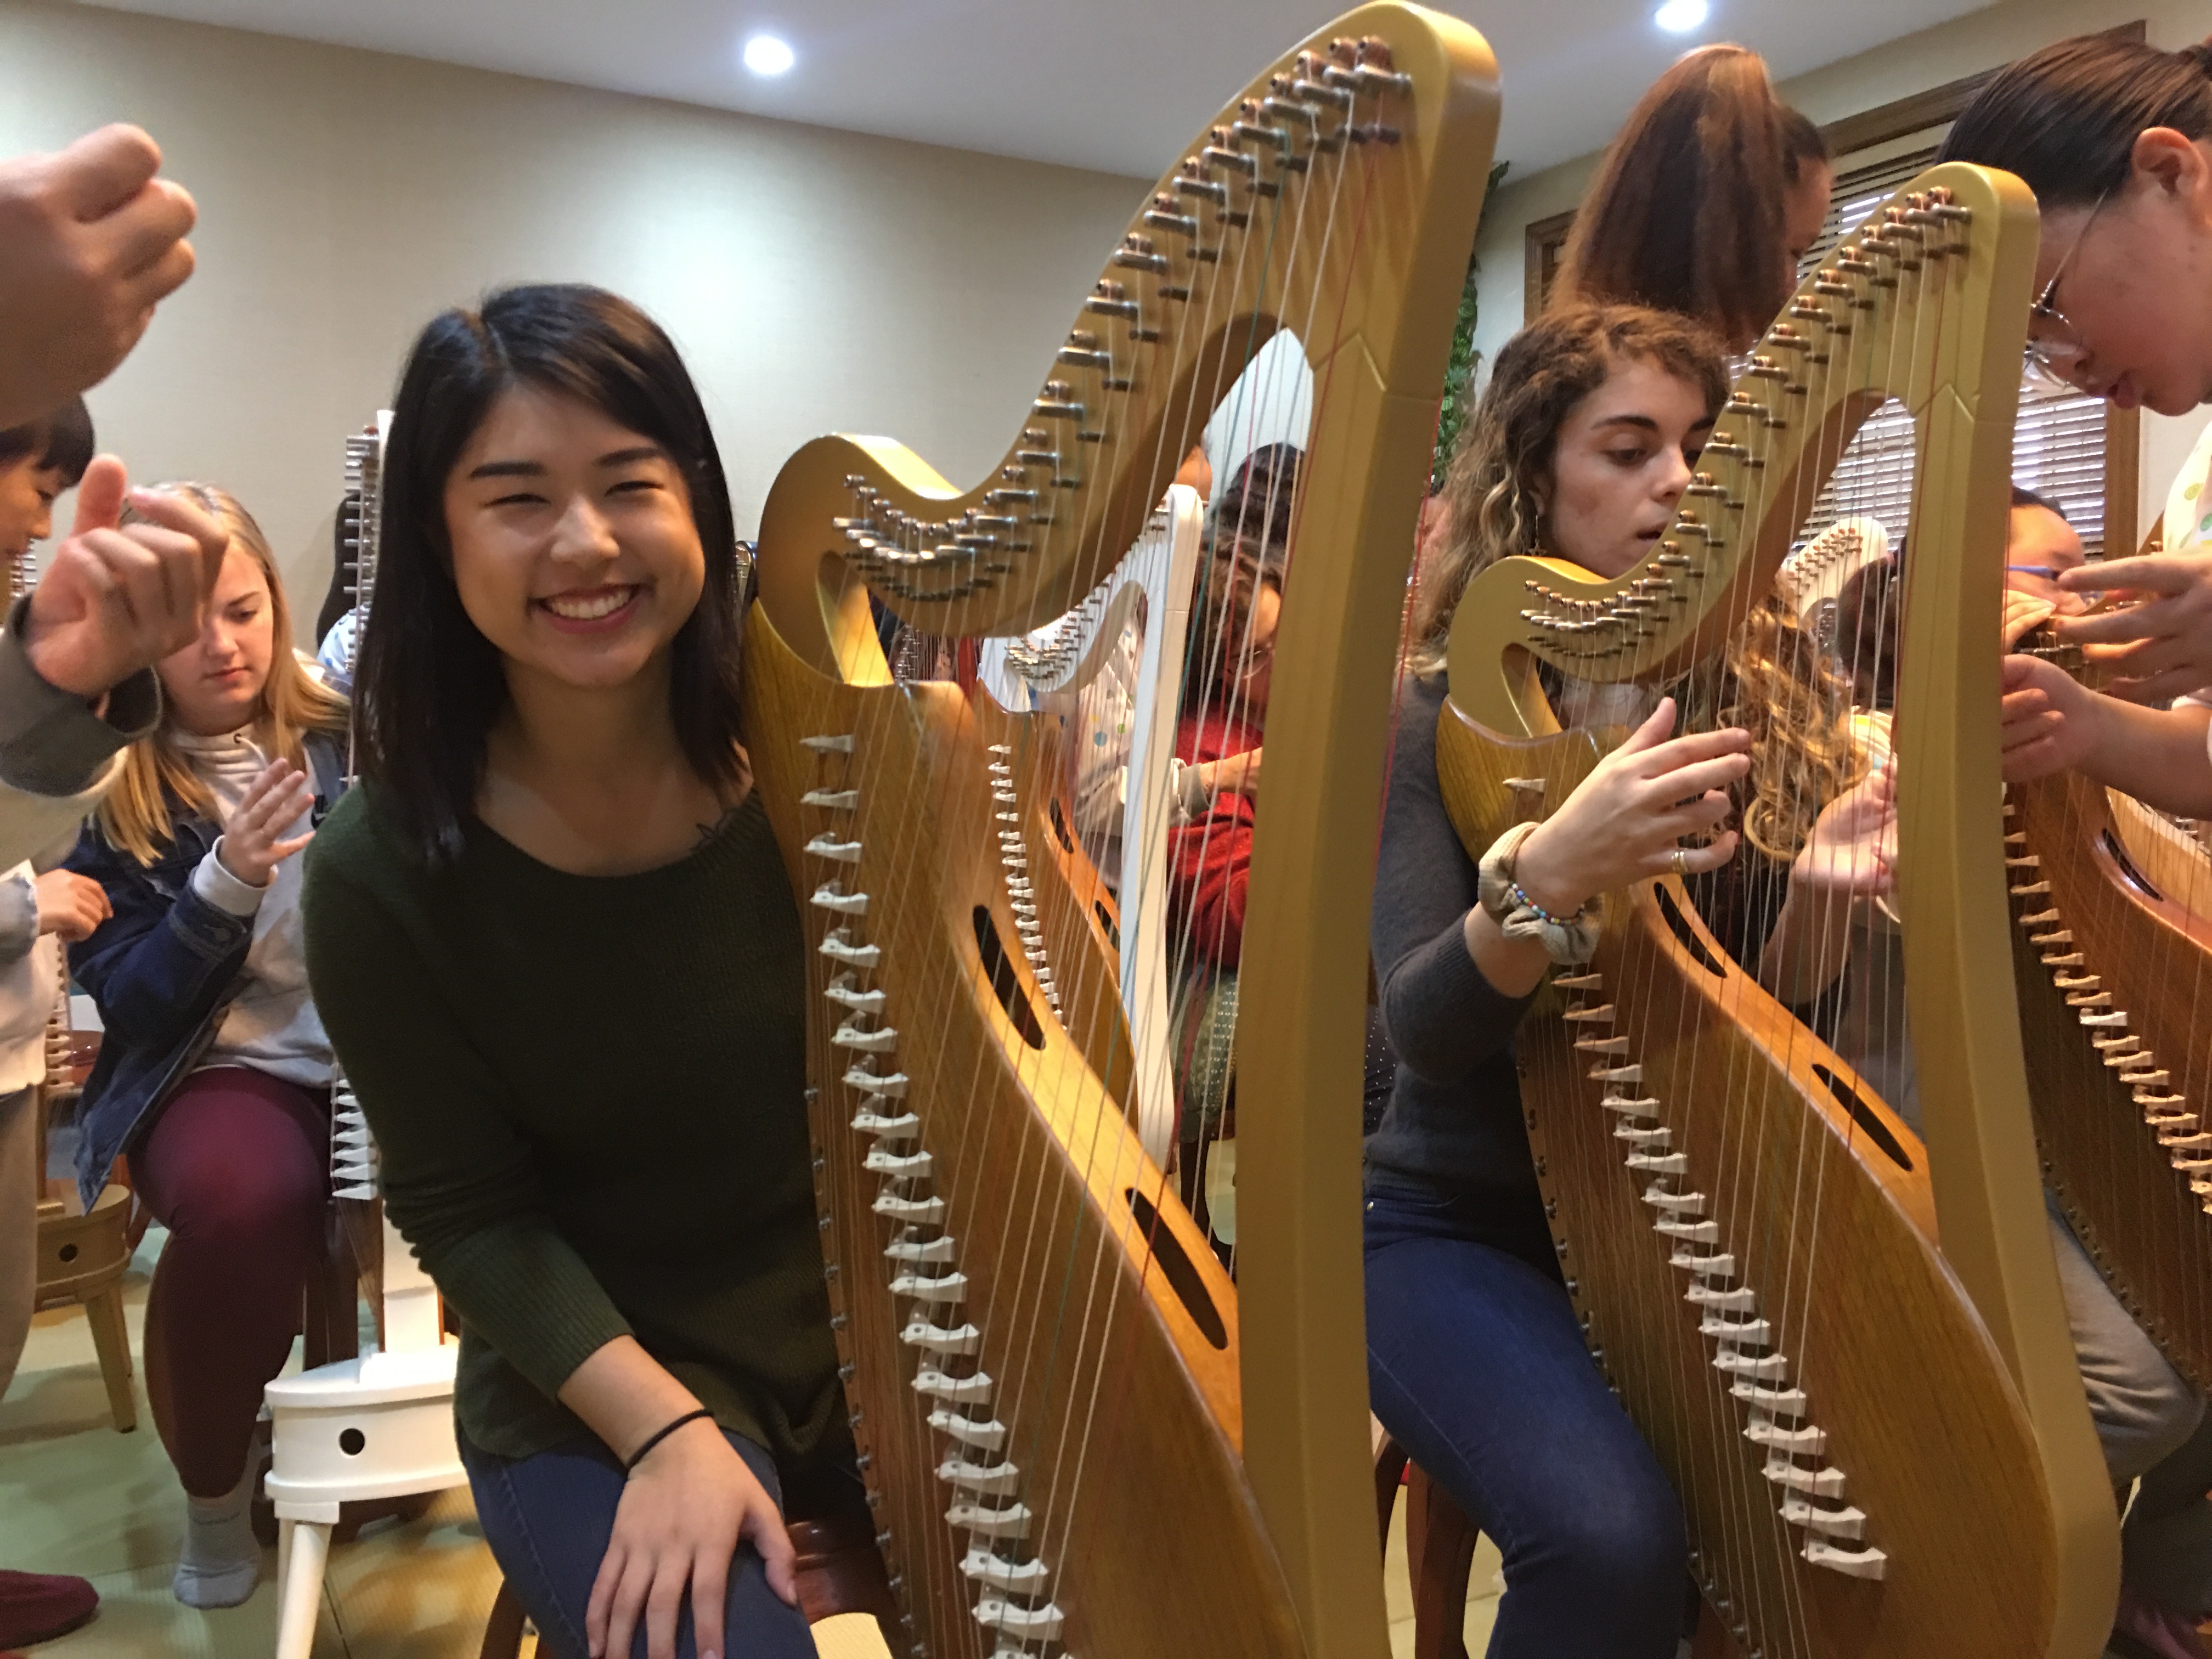 Student playing Chinese instruments resembling a large harp.